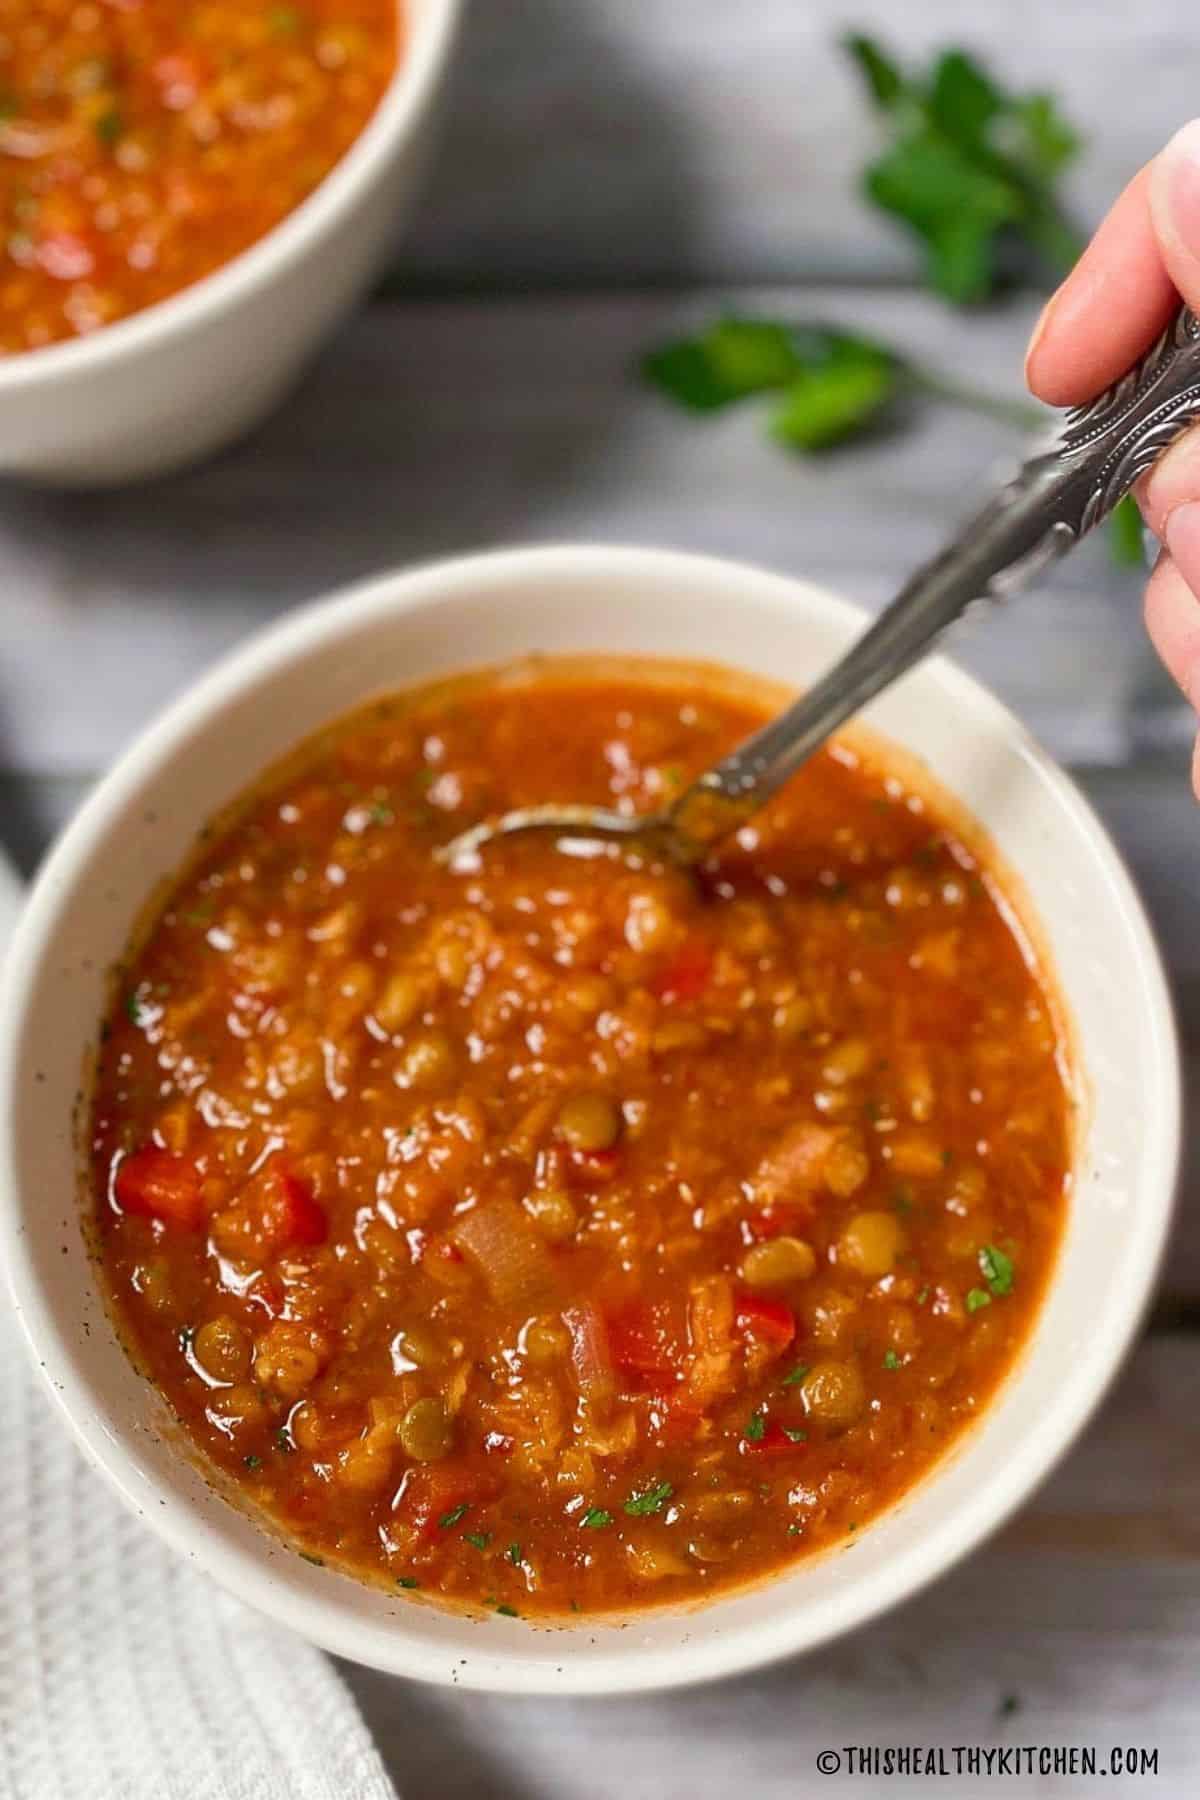 Sloppy joe soup in bowl with hand holding spoon inside.